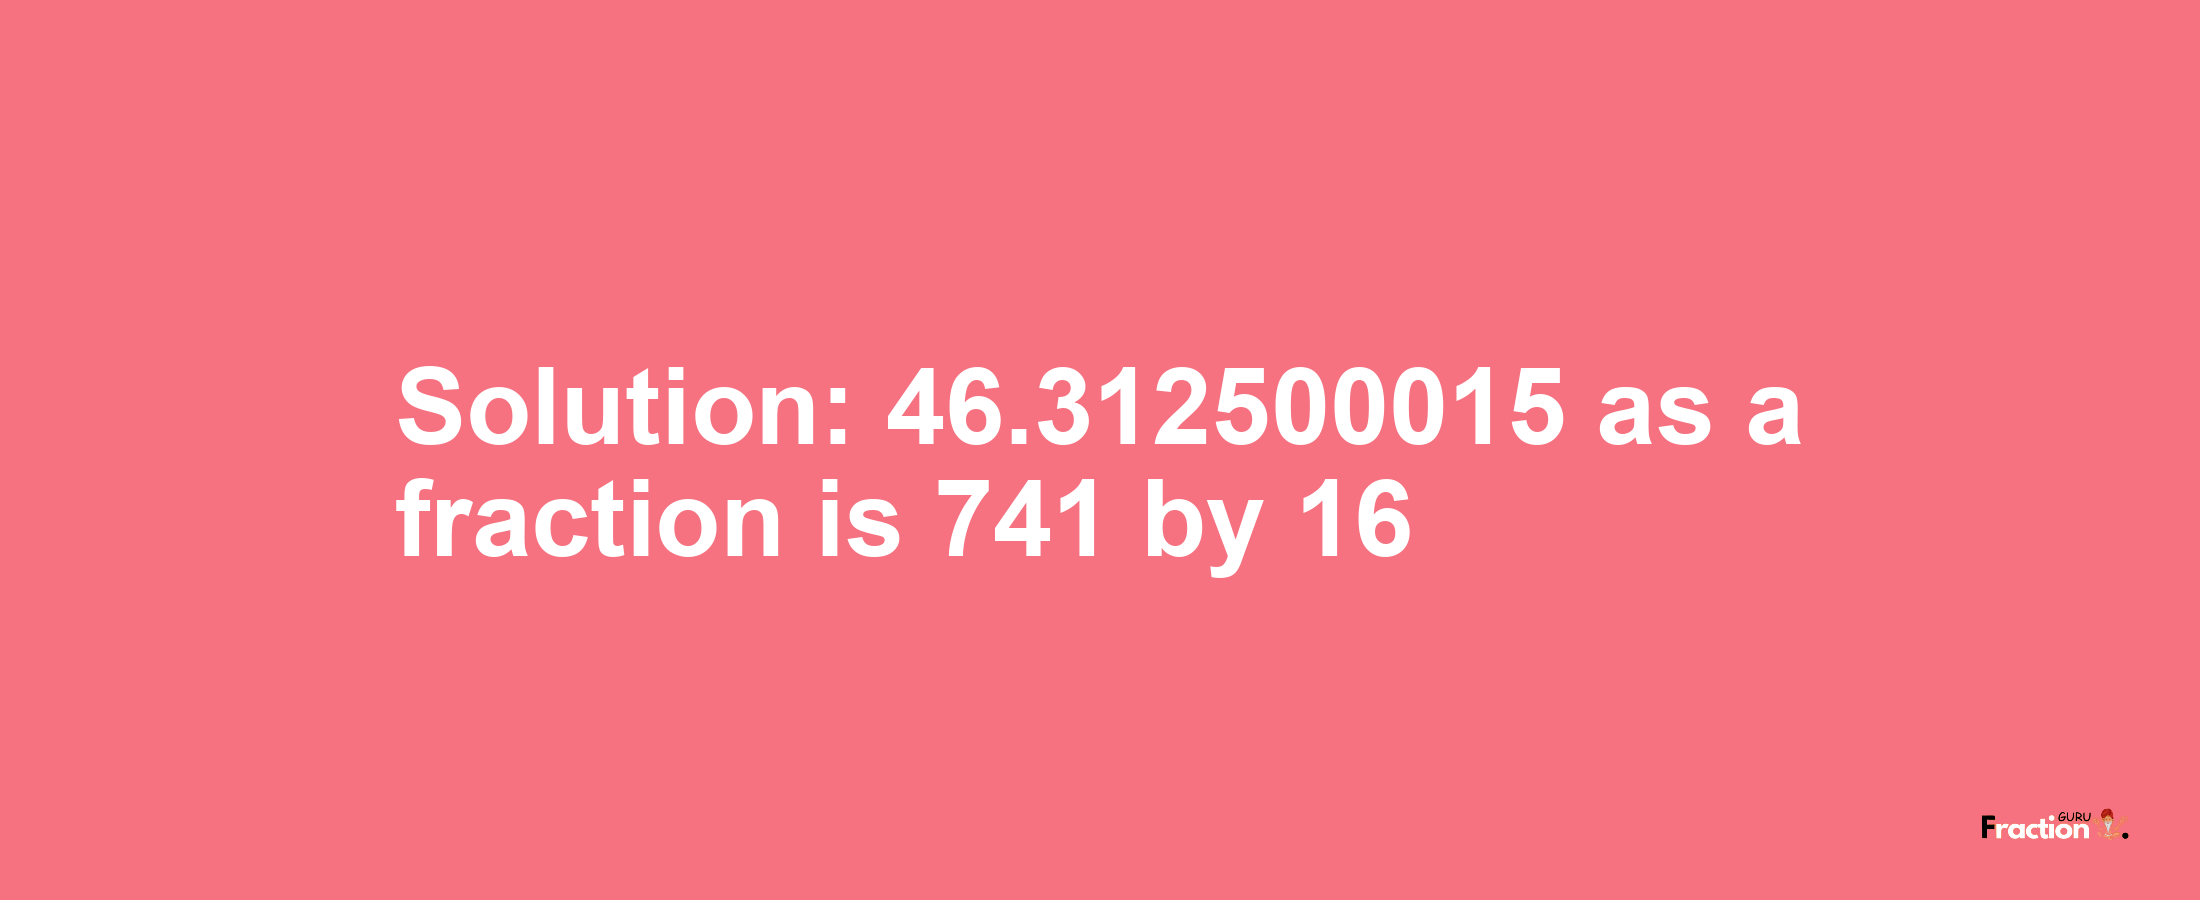 Solution:46.312500015 as a fraction is 741/16